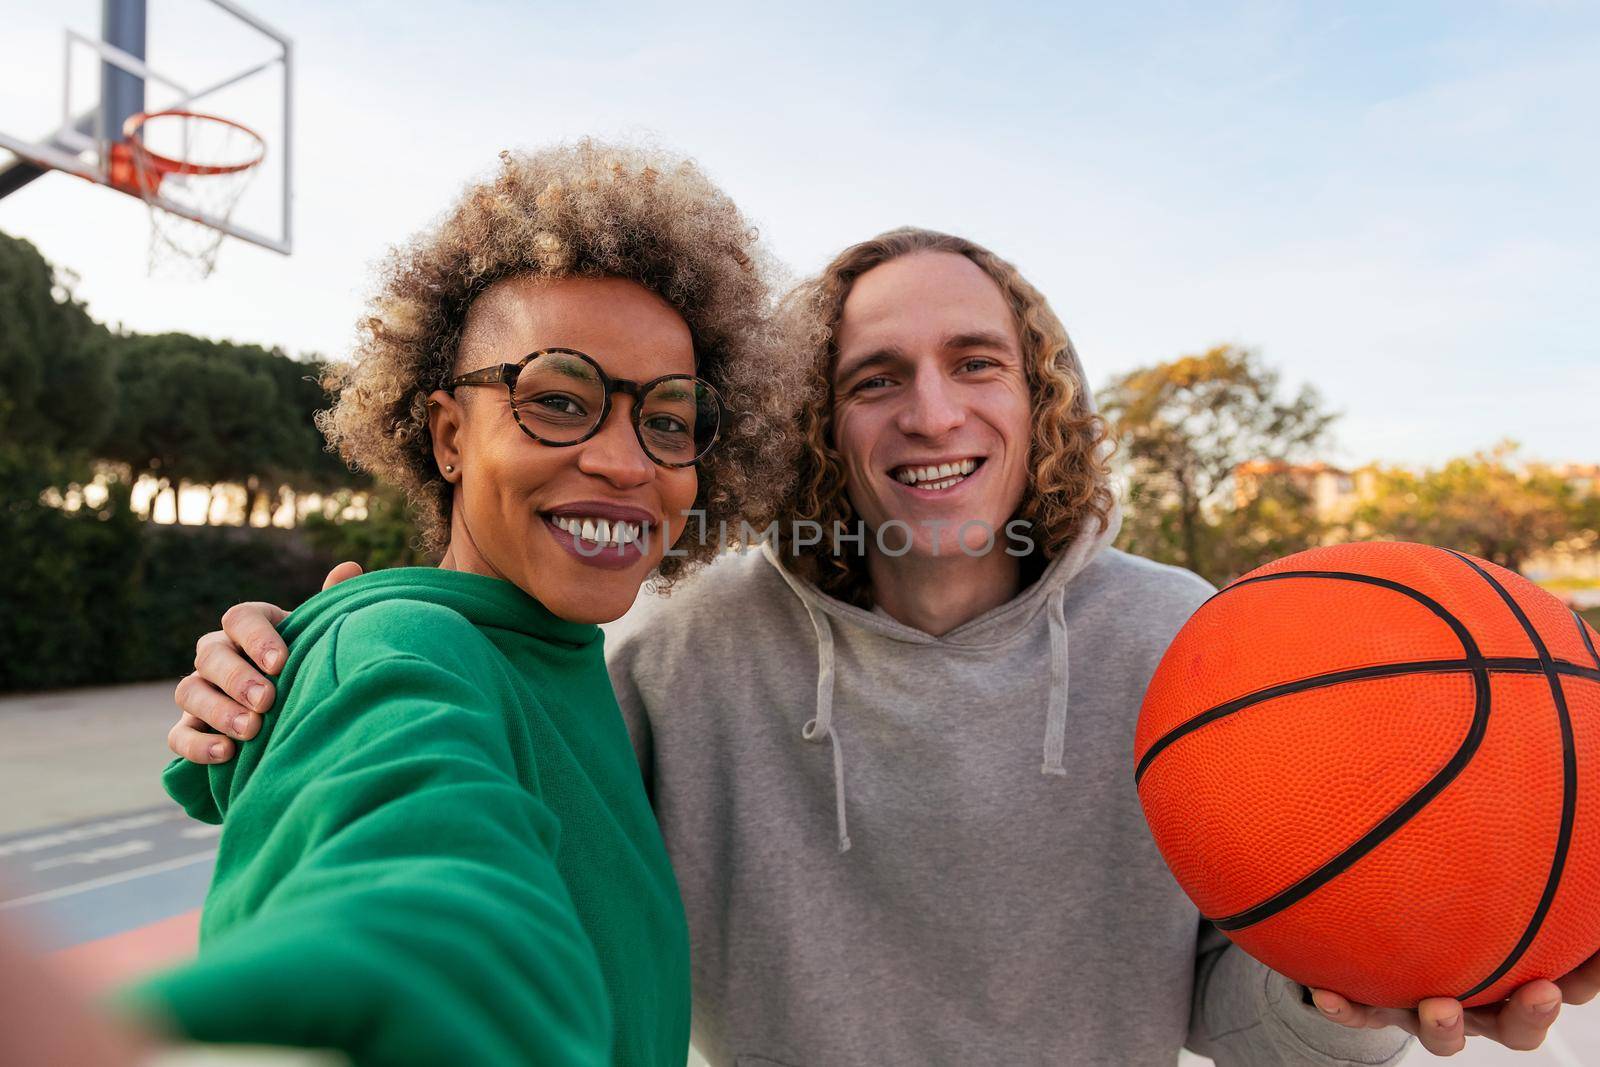 selfie of a latin woman and caucasian man smiling happy after playing in a city park basketball court, concept of friendship and urban sport in the street